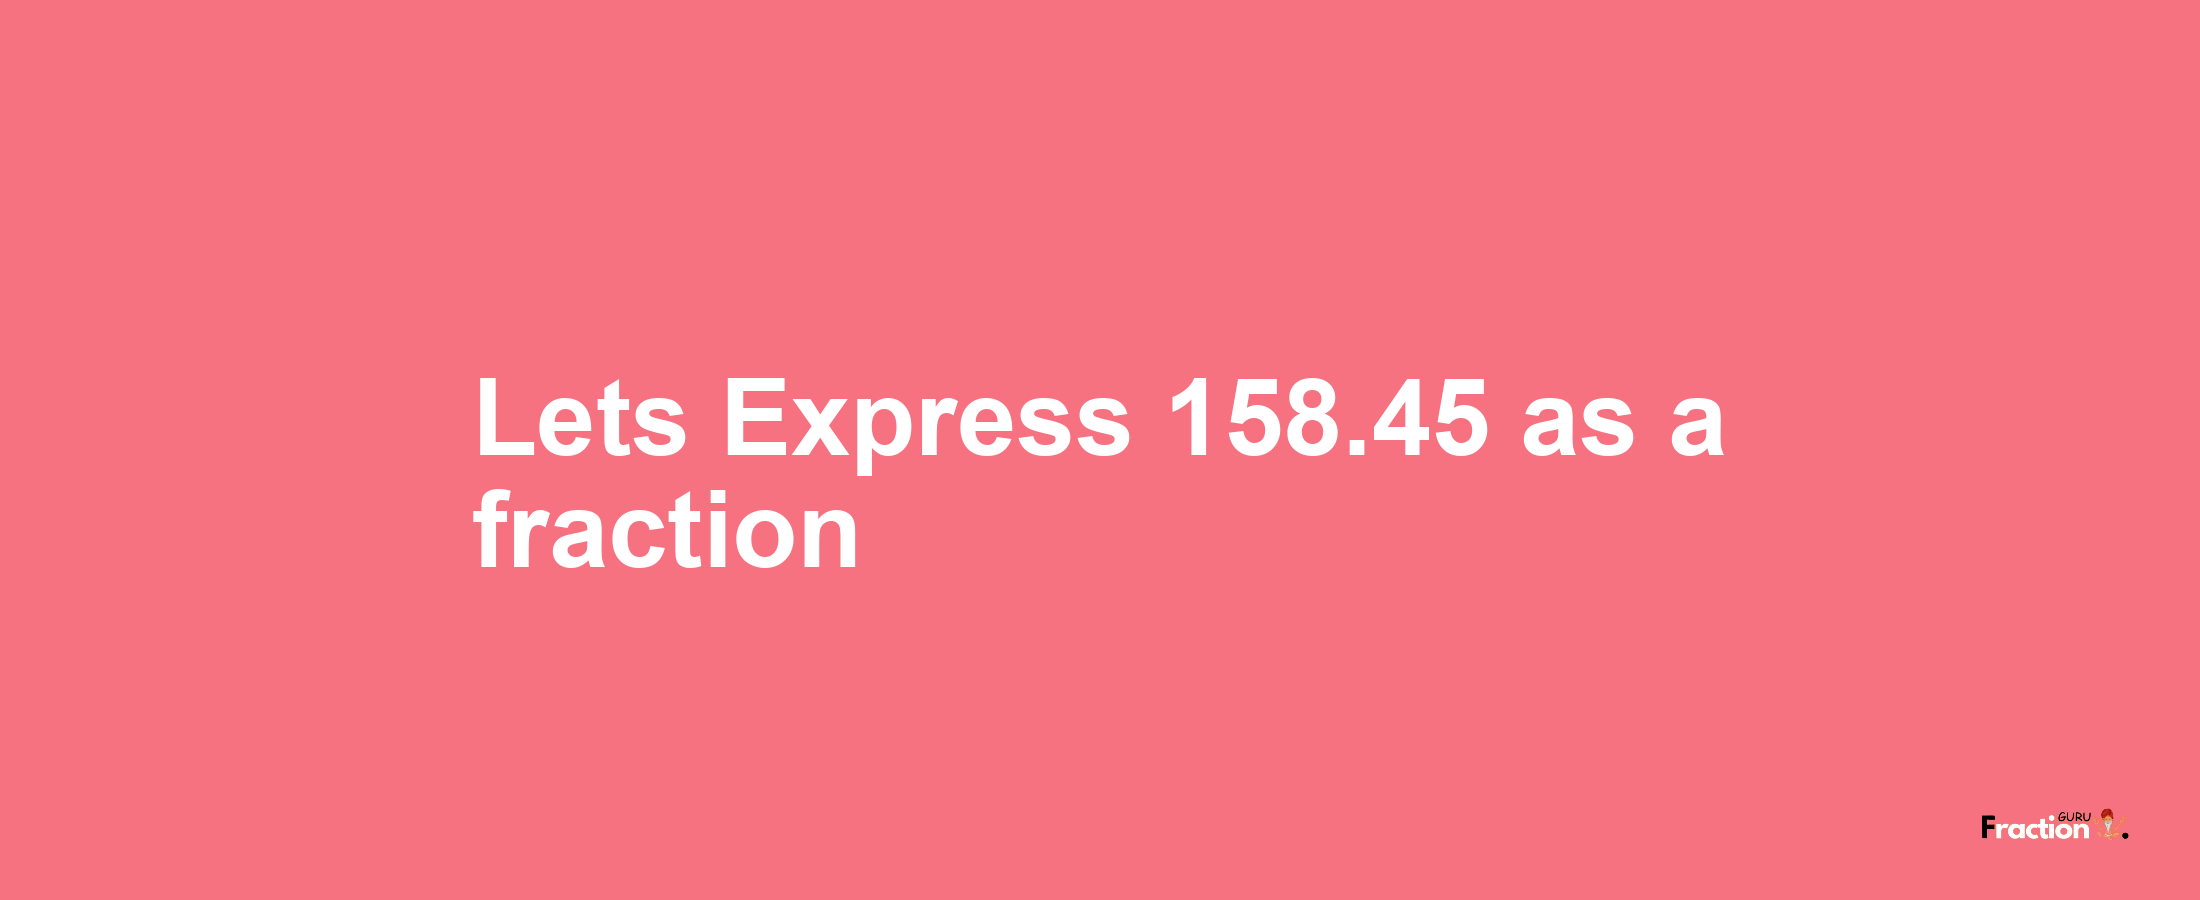 Lets Express 158.45 as afraction